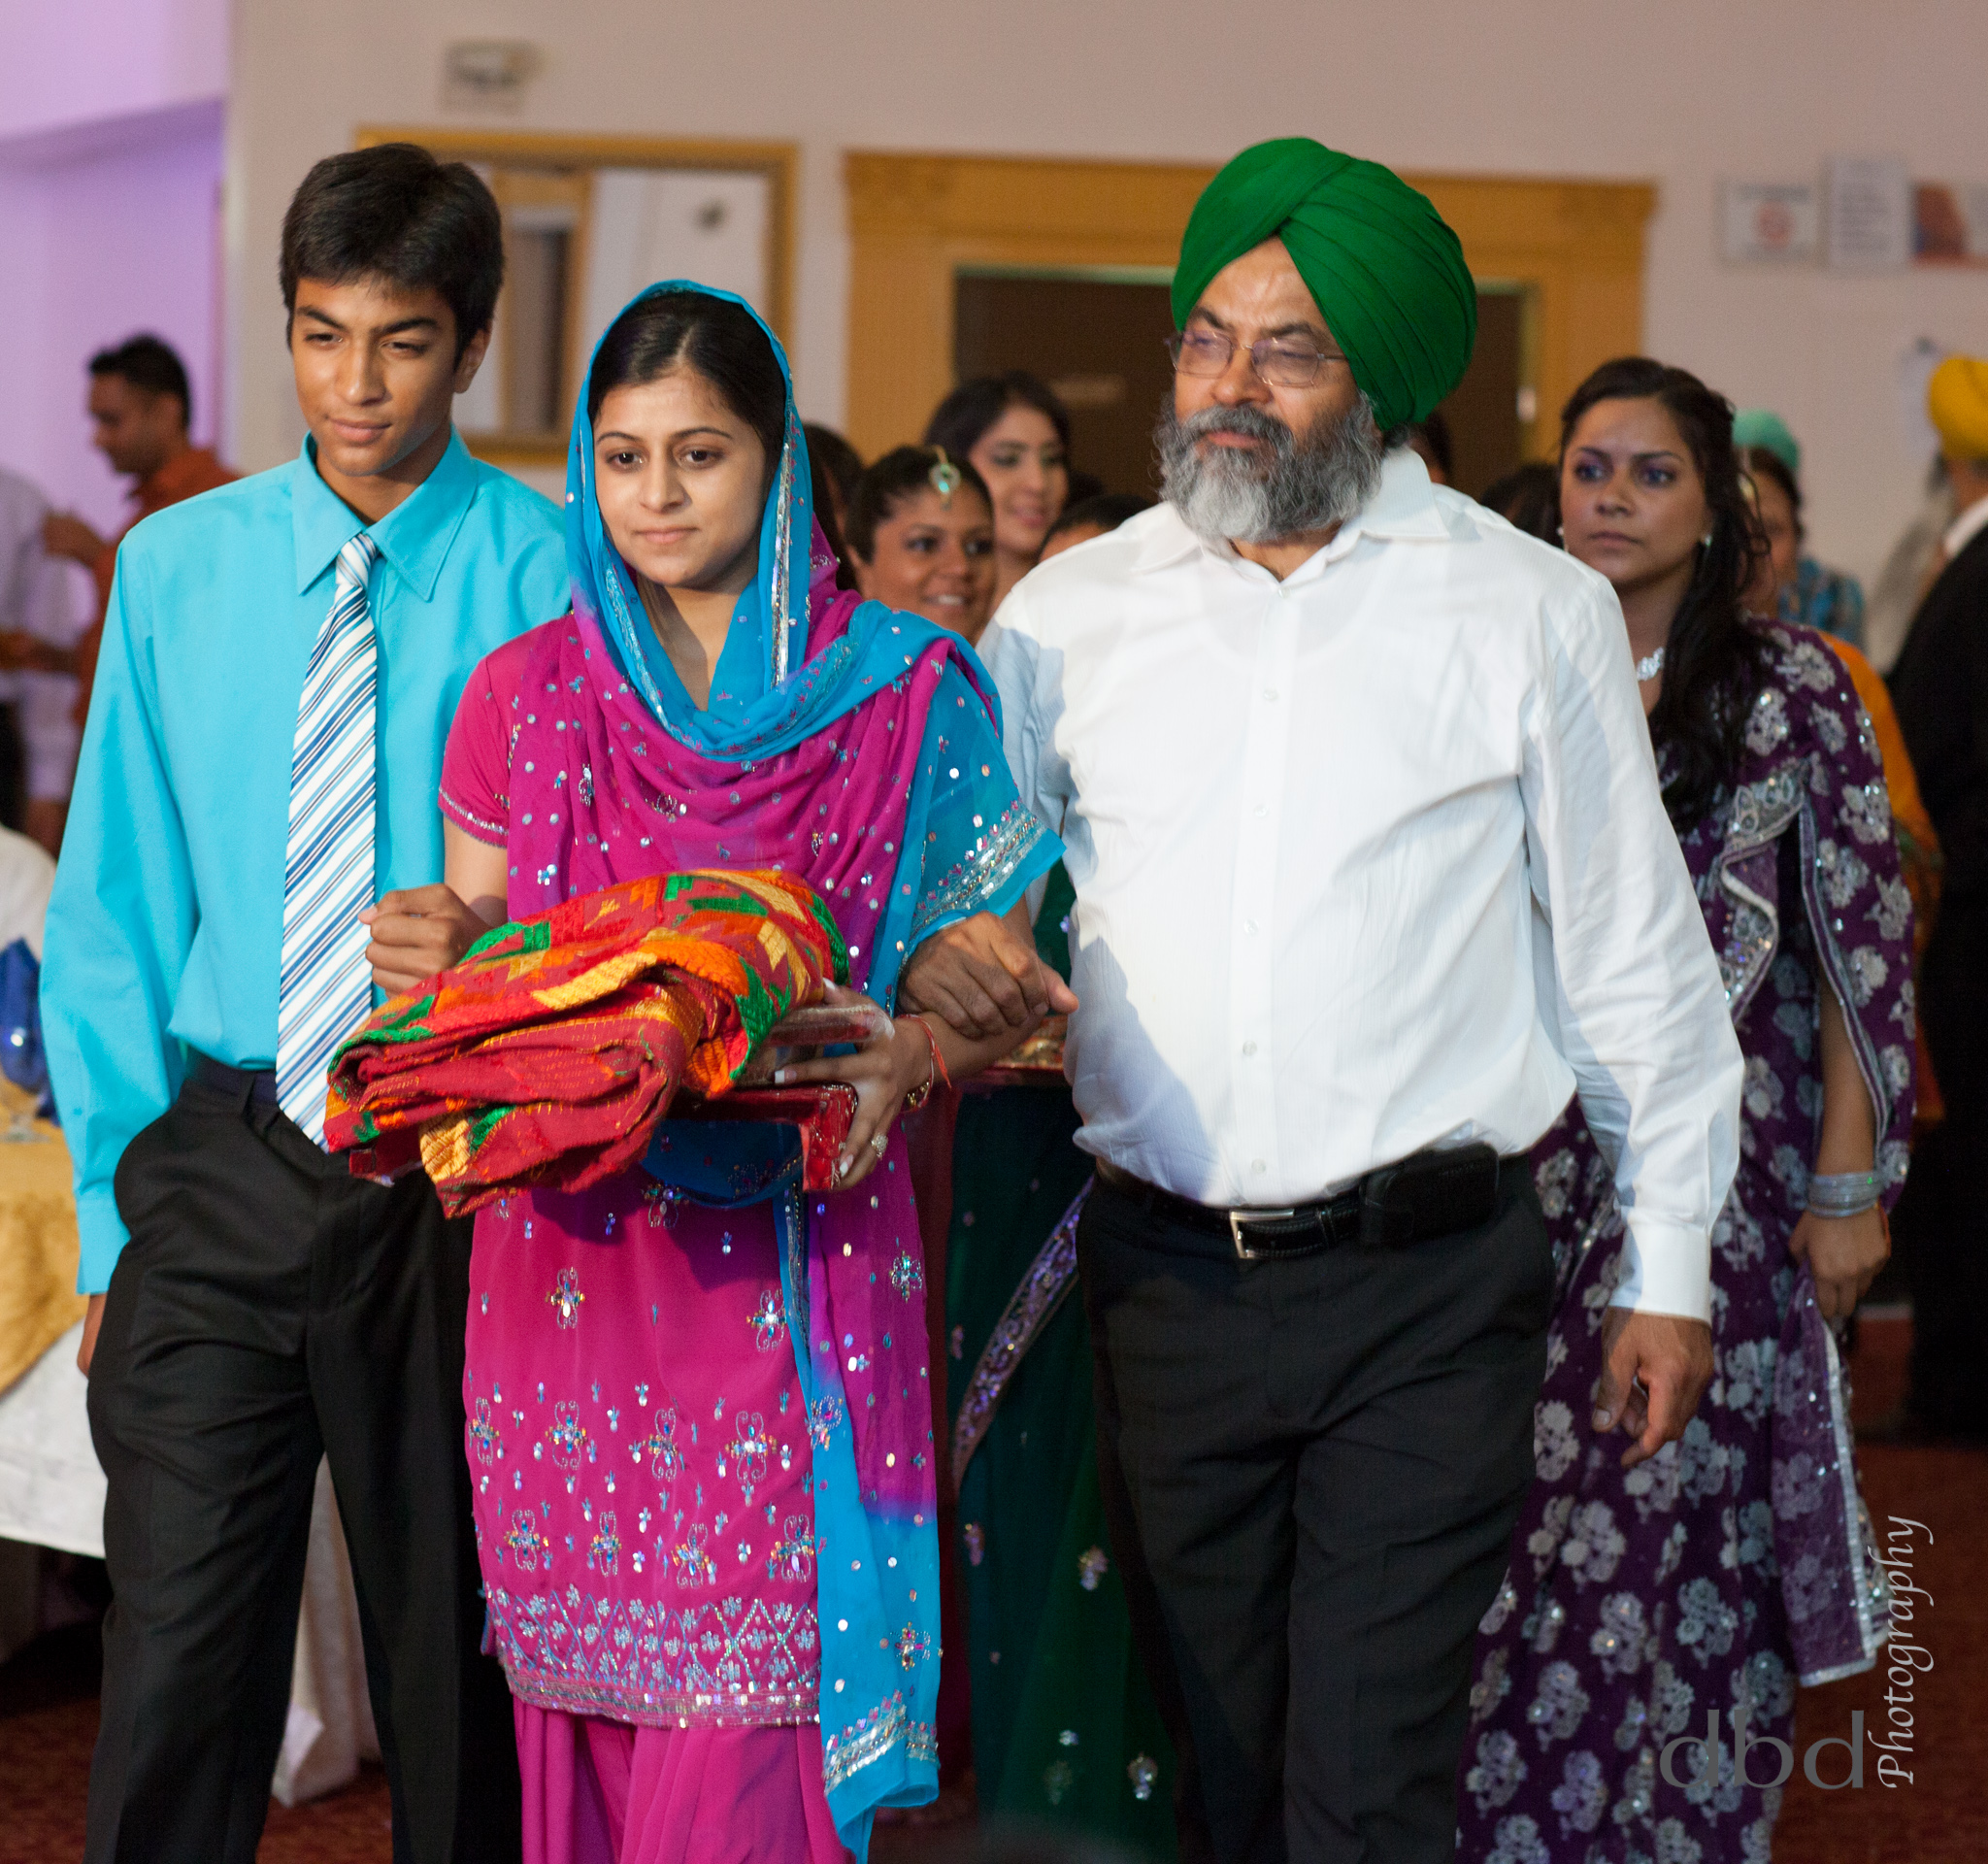  Preet is ushered in to the ceremony by her father and brother, carrying the items she will need on the&nbsp; thaal  (tray) 